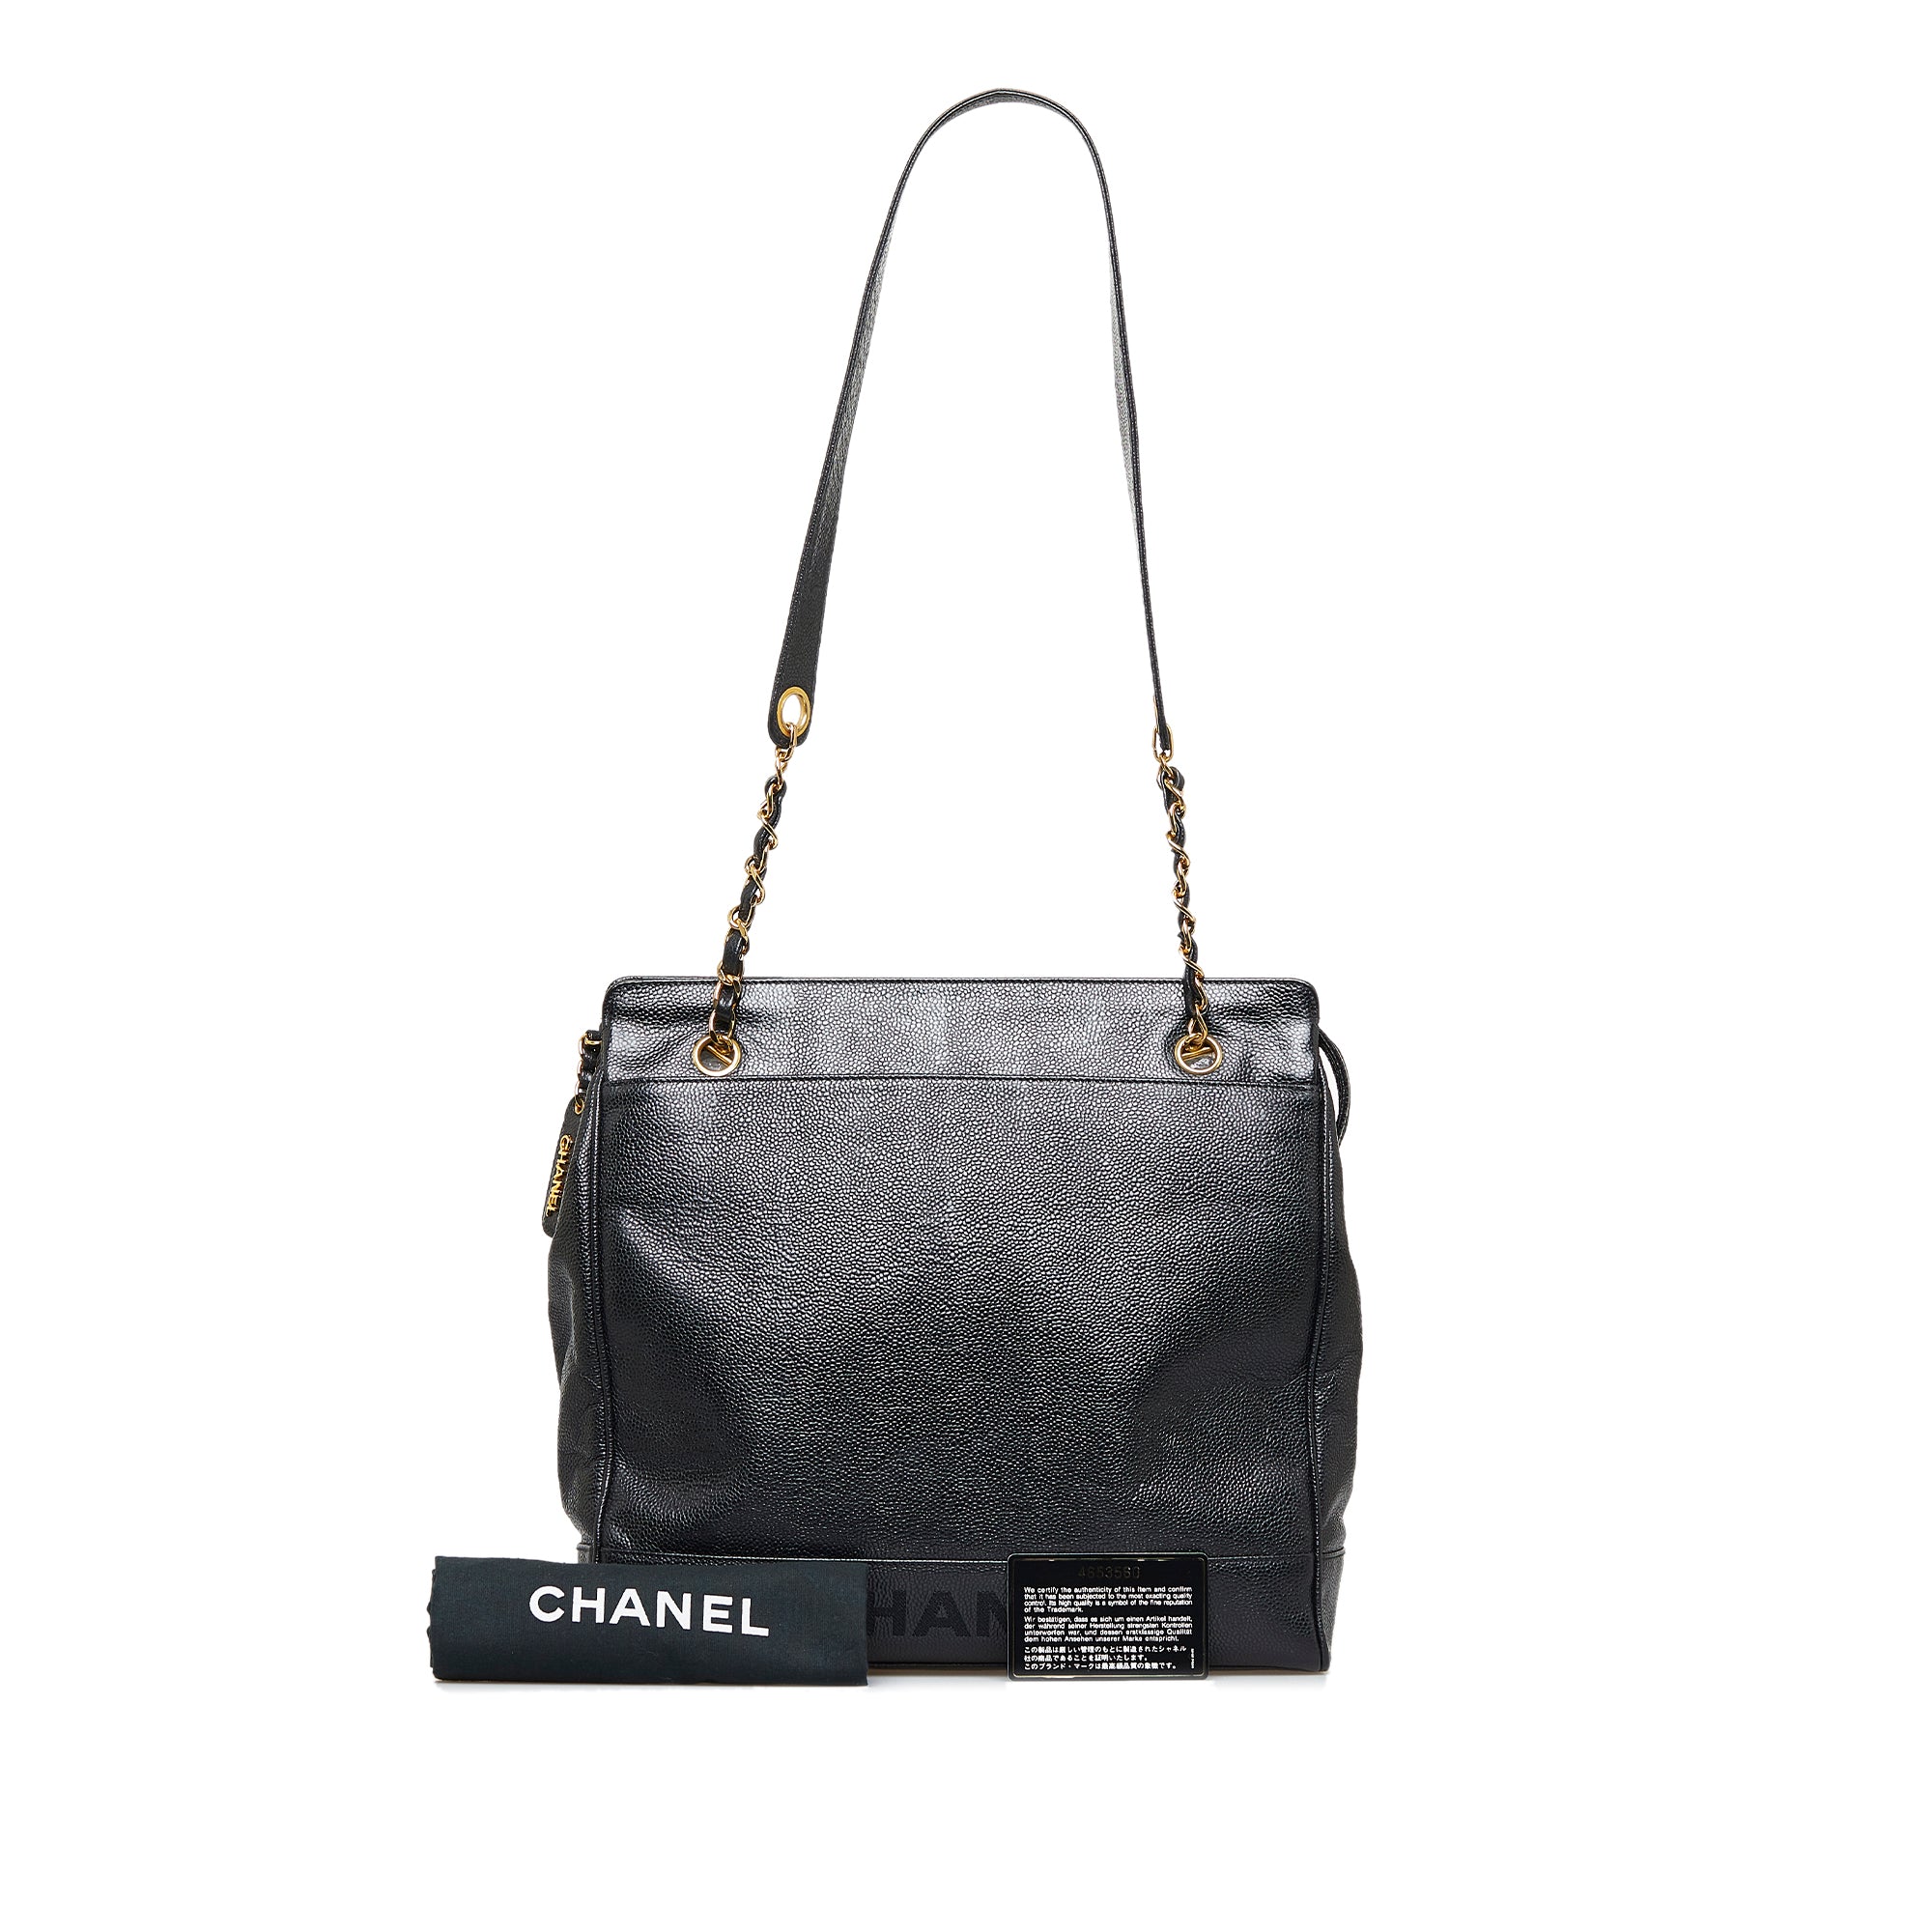 Chanel Caviar Handbags - 758 For Sale on 1stDibs  chanel caviar purse, black  caviar leather chanel, caviar quilted chanel bag